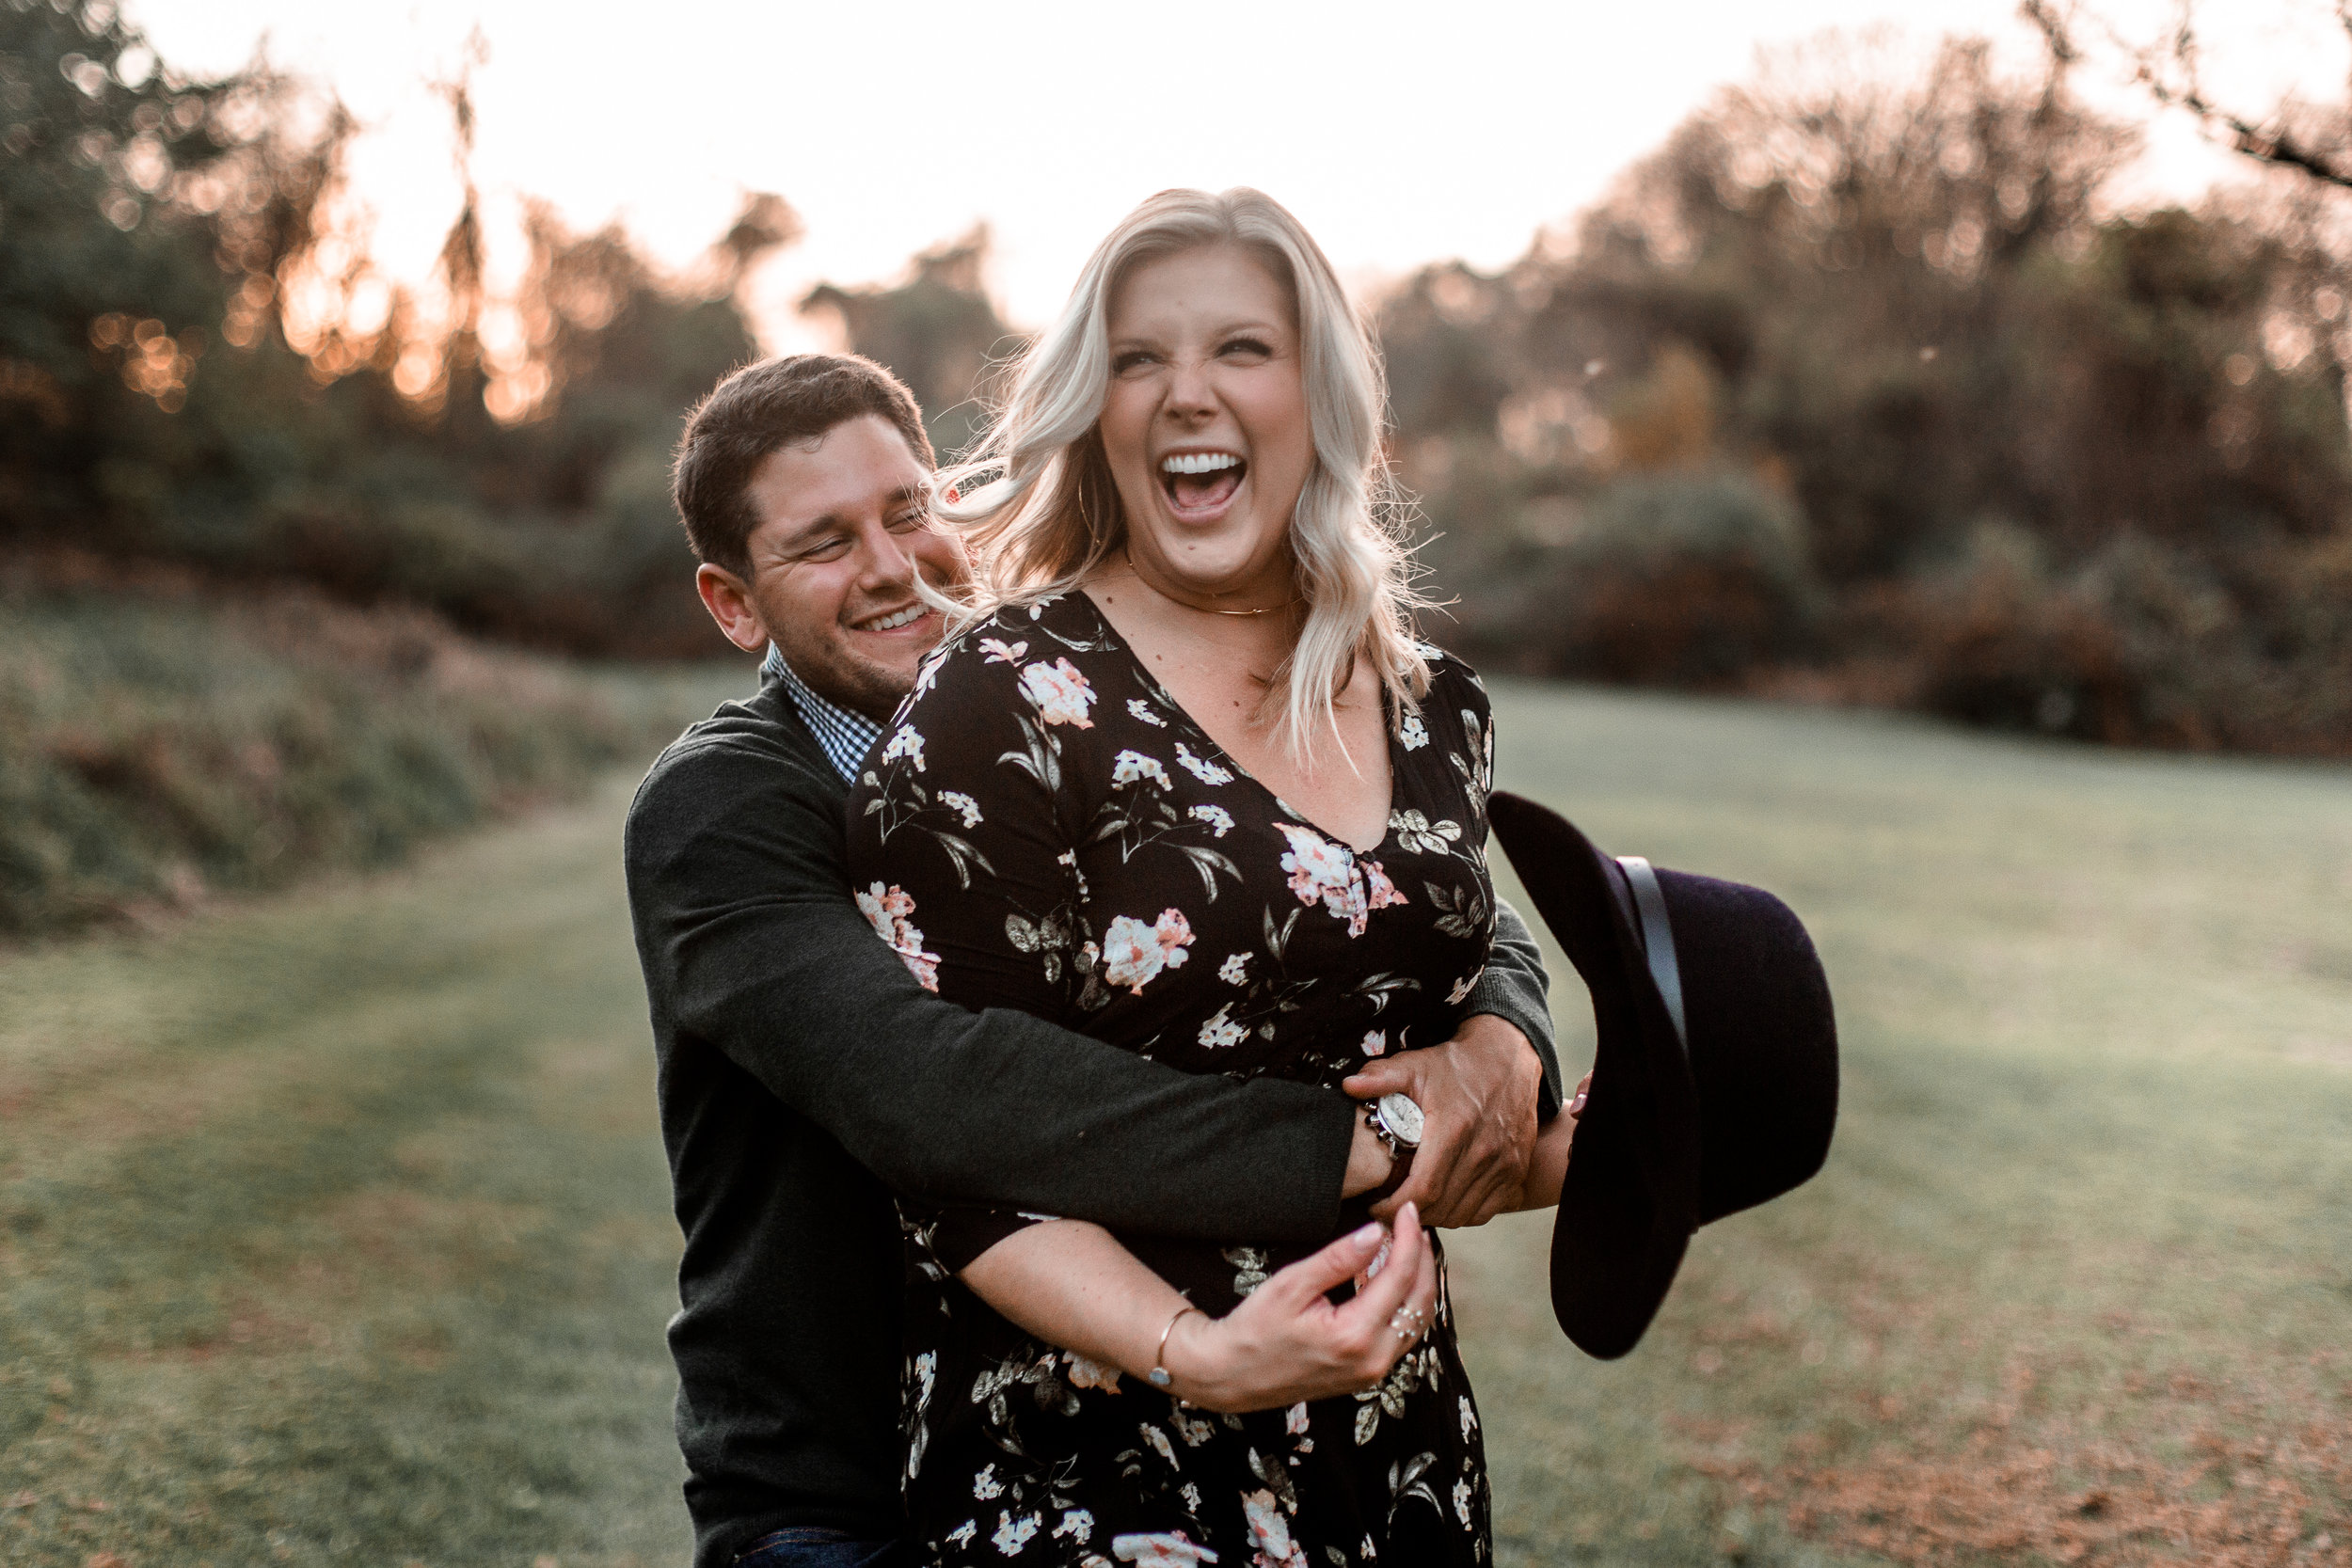 nicole-daacke-photography-carefree-bohemian-lancaster-pa-pennsylvania-engagement-photos-engagement-session-golden-sunset-adventure-session-in-lancaster-pa-lancaster-pa-outdoor-wedding-photographer-41.jpg